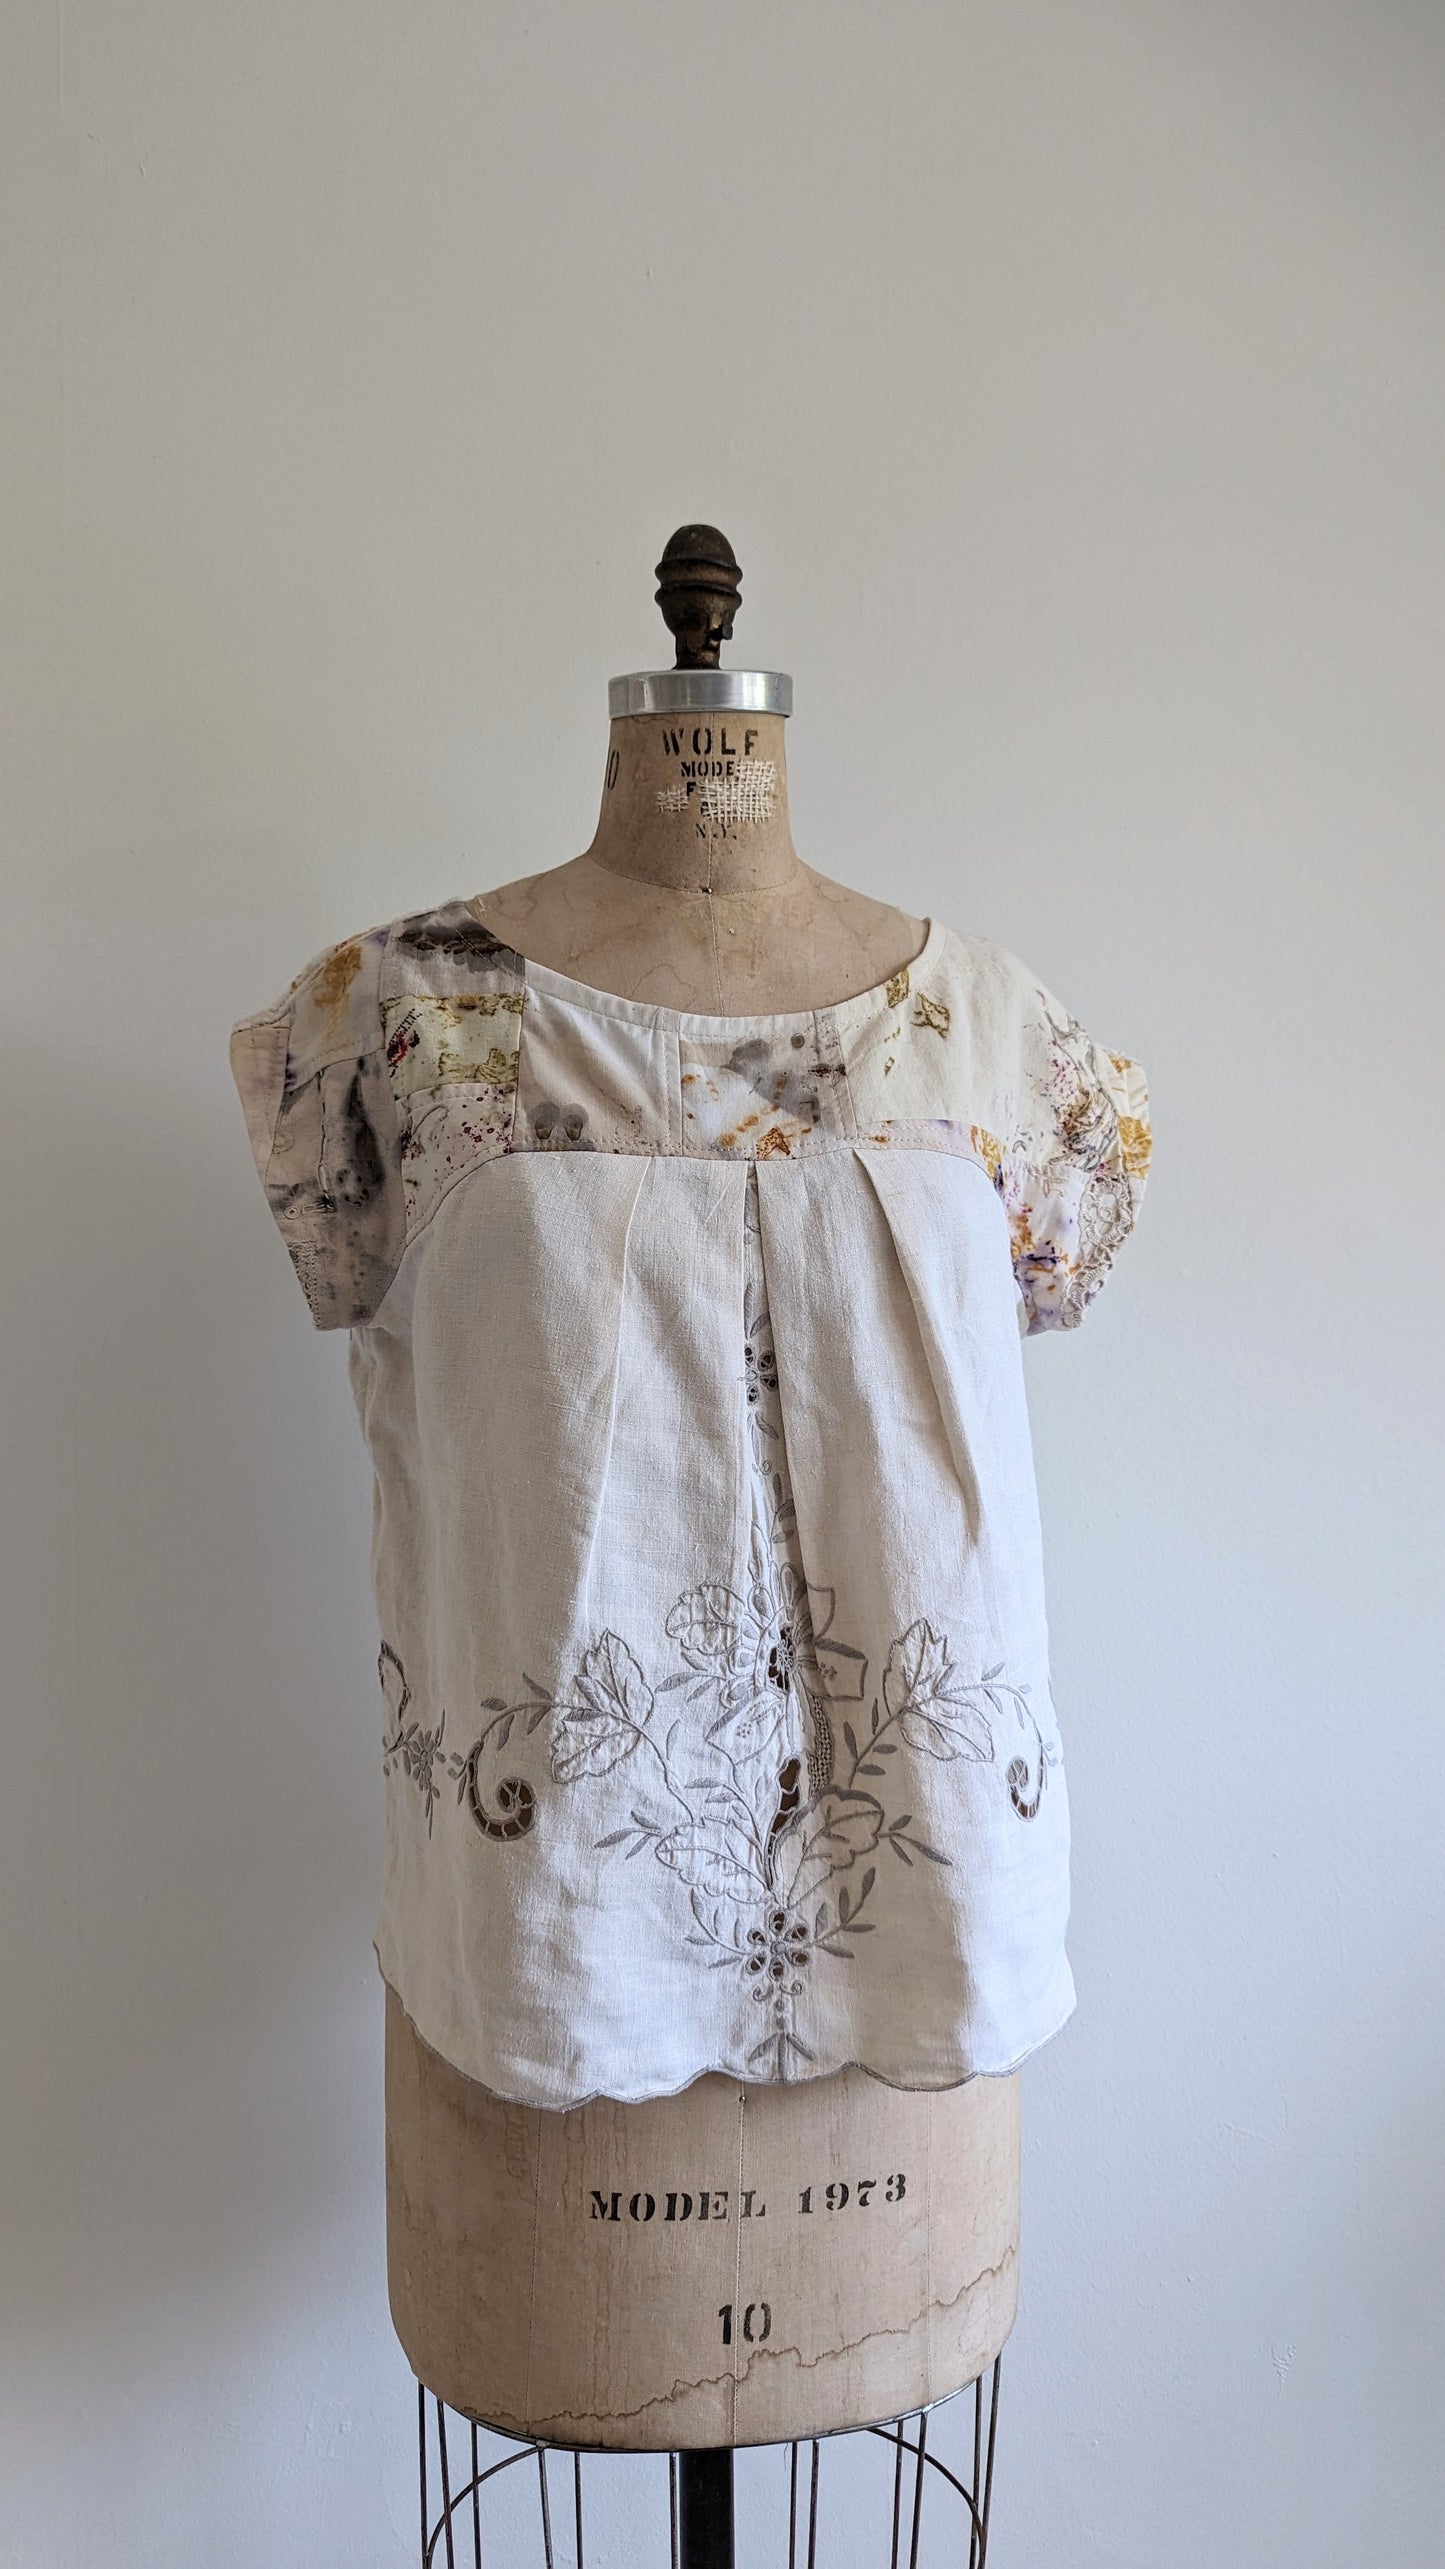 Peony Top - One of a Kind Naturally Dyed Upcycled Cotton/Linen Size M #PEO2